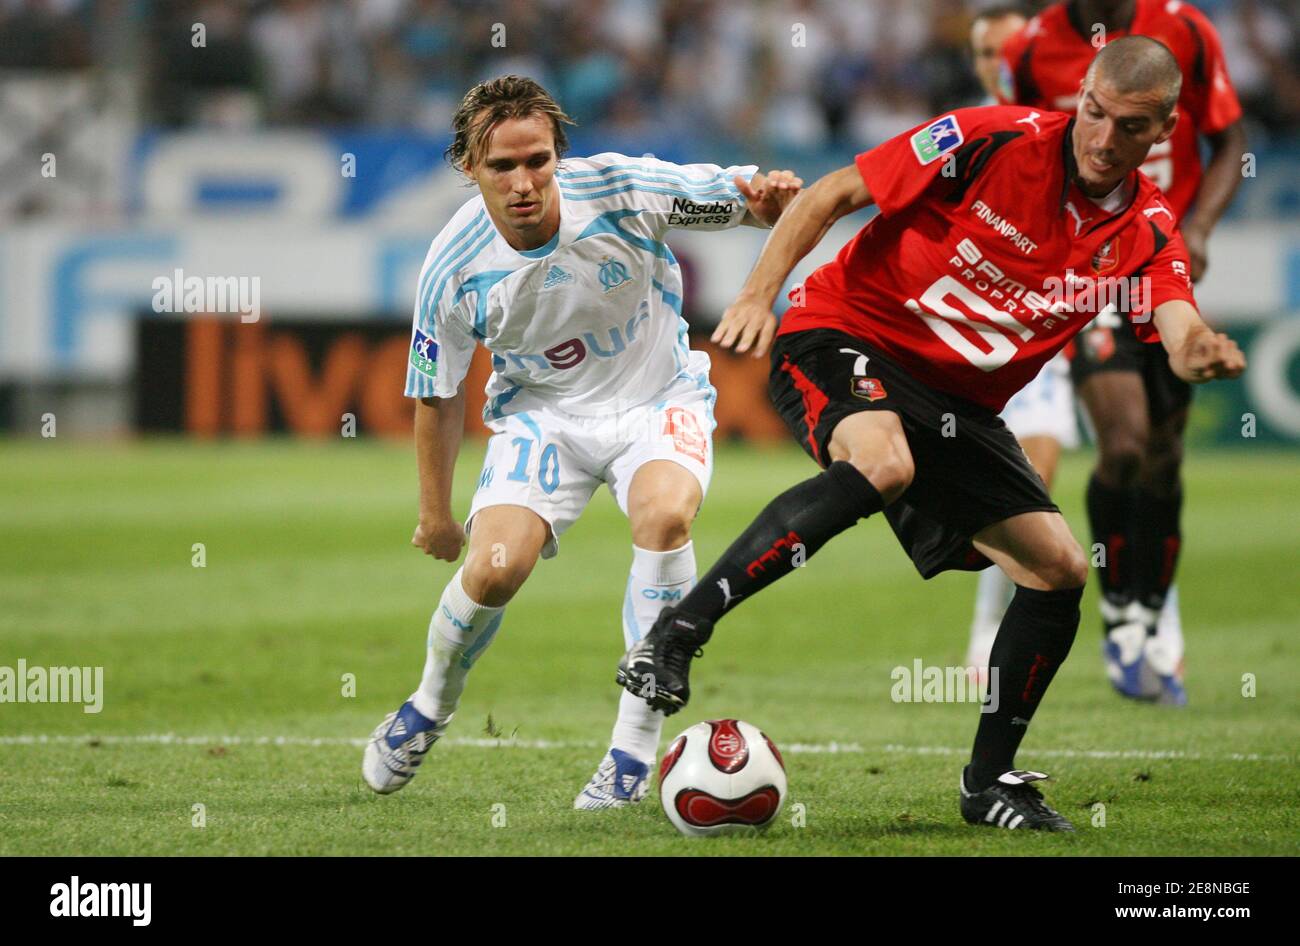 OM's Boudewijn Zenden and Rennes's Jerome Leroy battle for the ball during  the French Premier League football match, OM vs Rennes at 'Le Velodrome' in  Marseille, France. On August 11, 2007. The